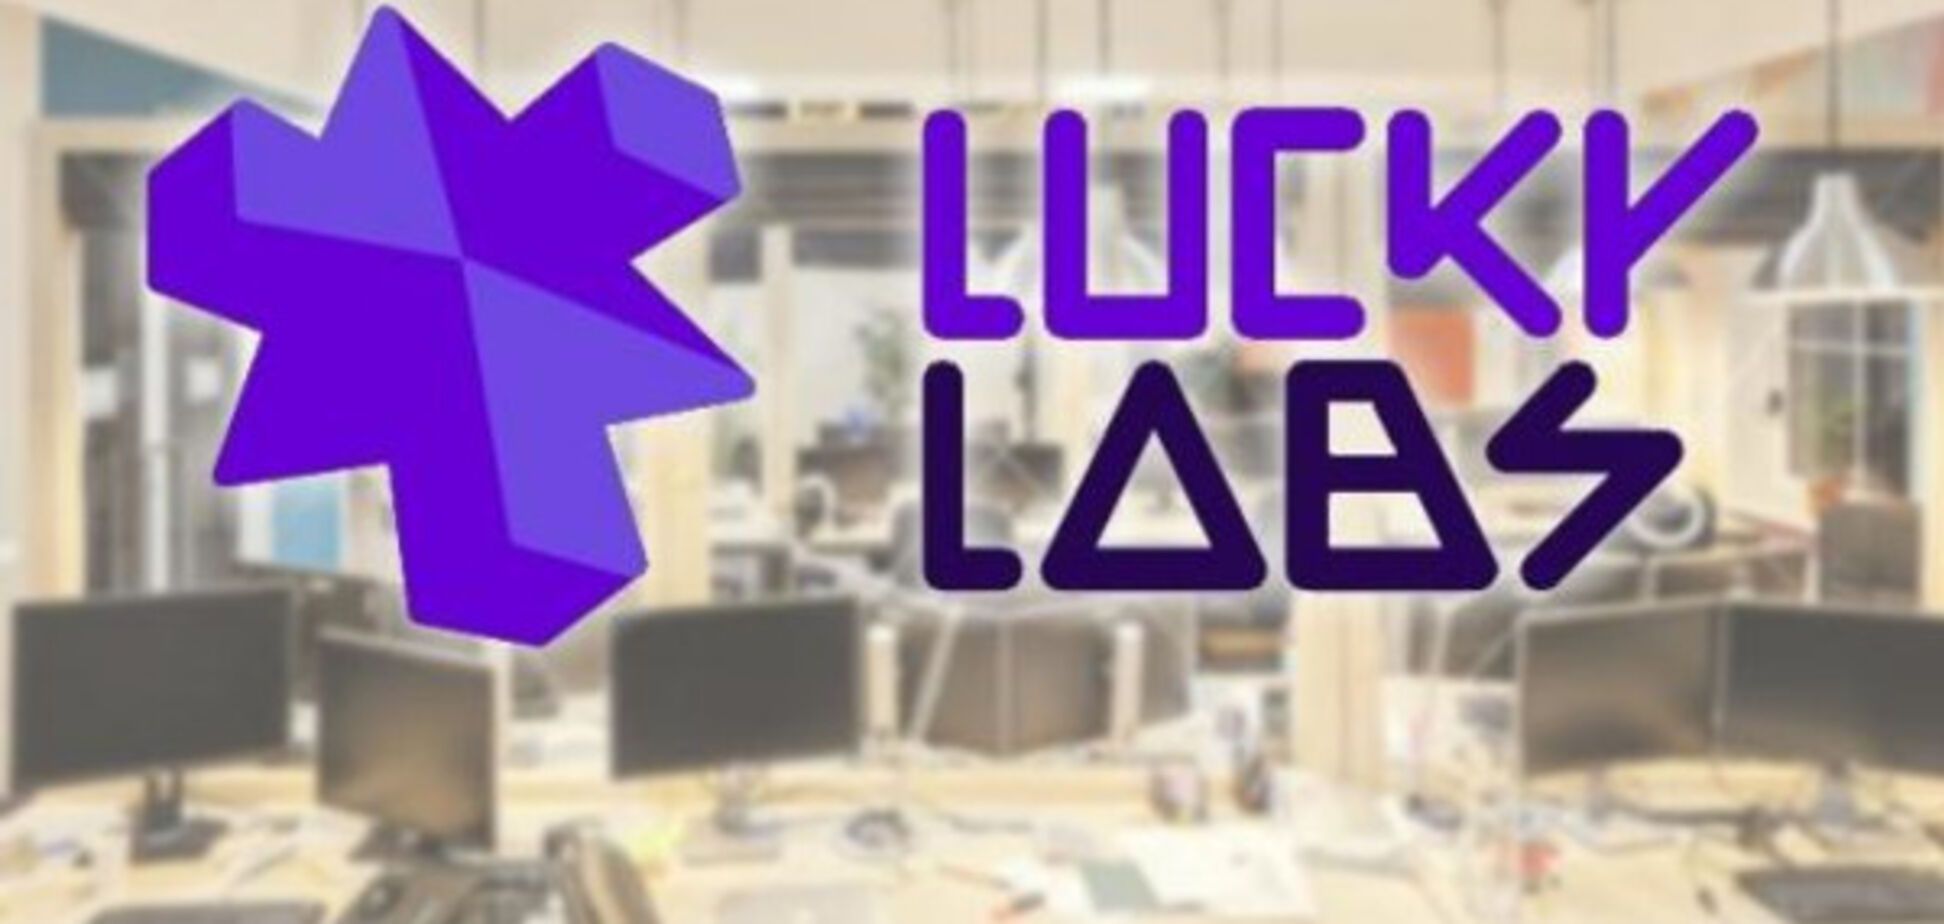 Lucky Labs